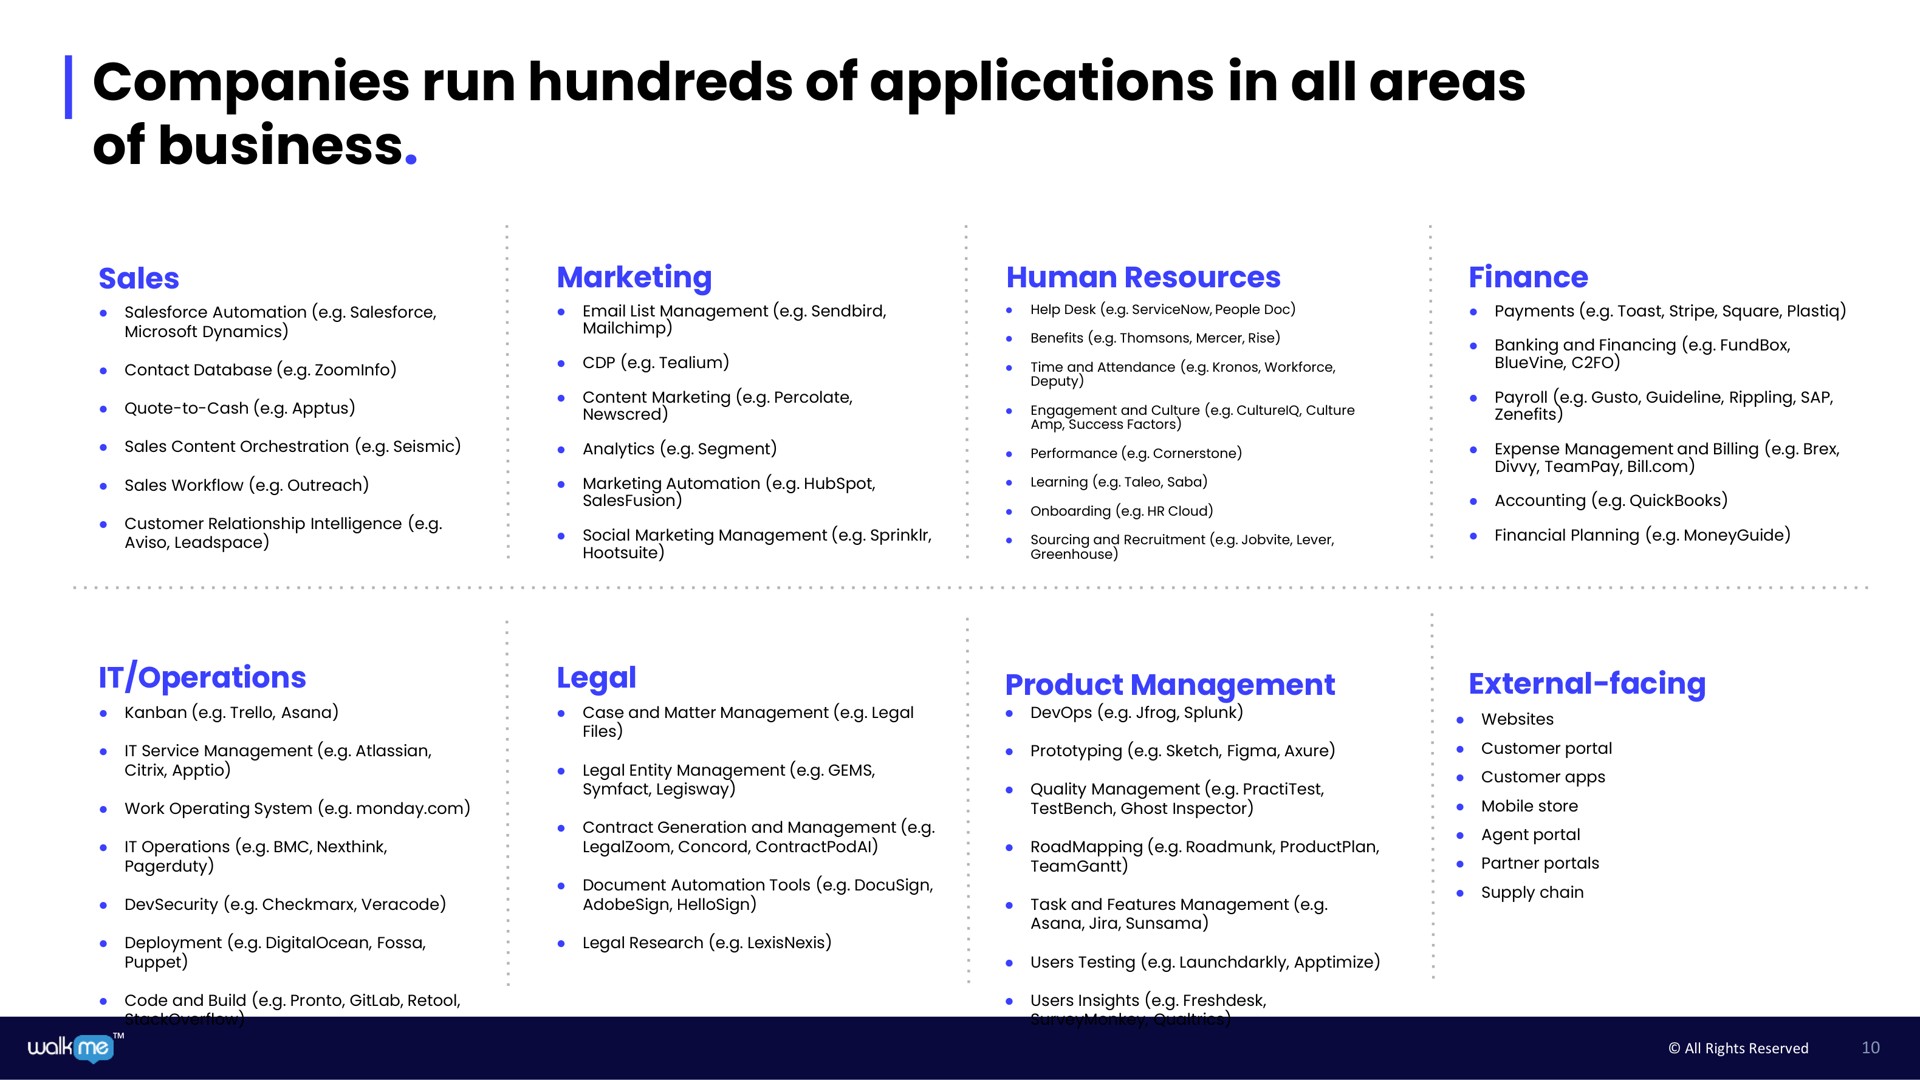 companies run hundreds of applications in all areas of business | Walkme